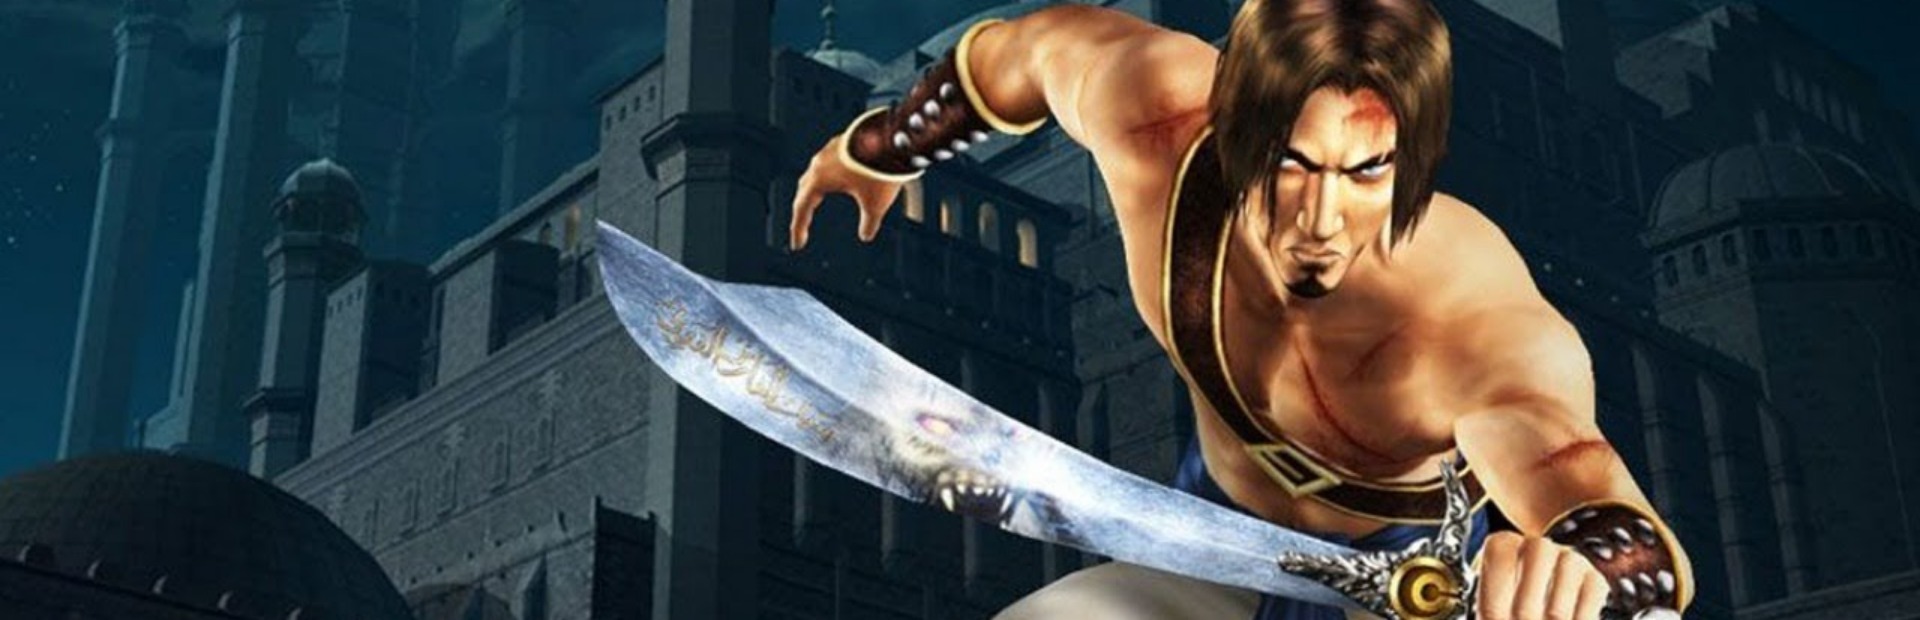 Steam prince of persia the sands of time фото 49